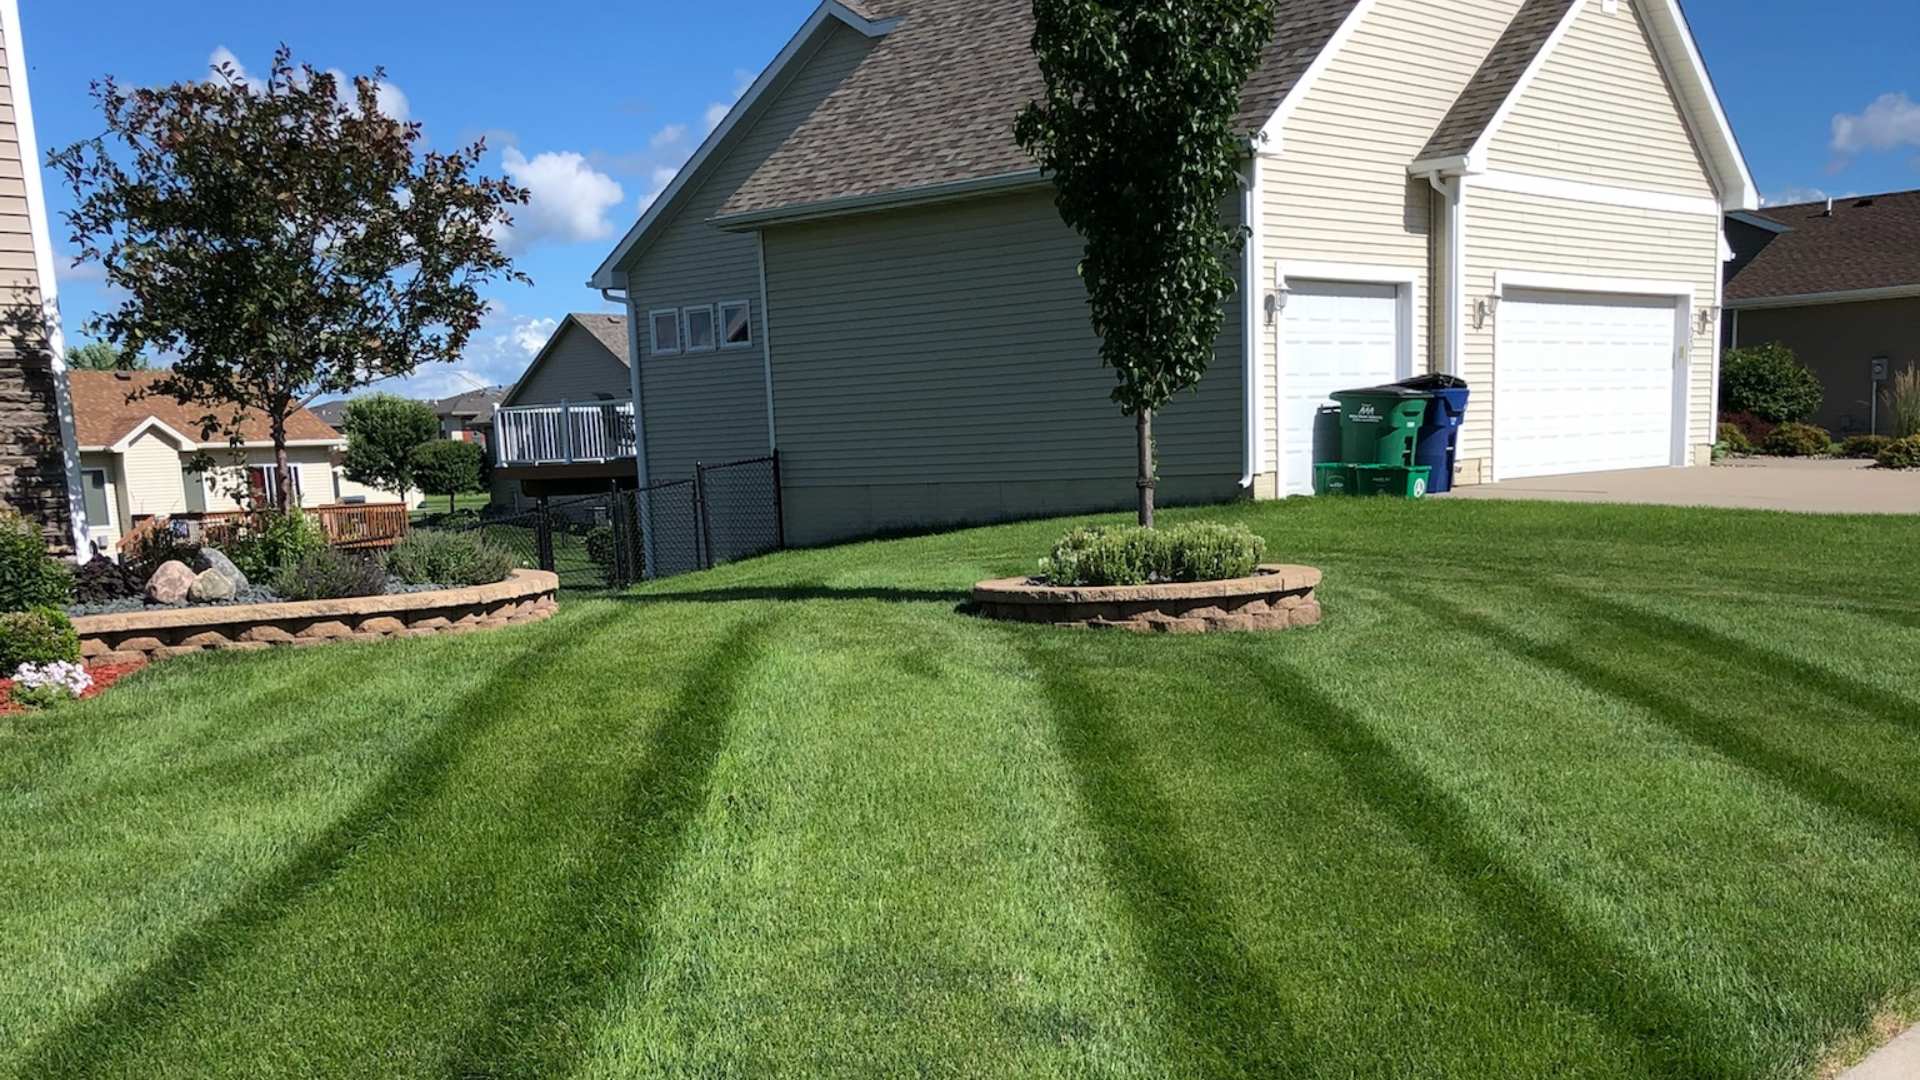 Mowed lawn with patterns added in diagonal direction in Urbandale, IA.